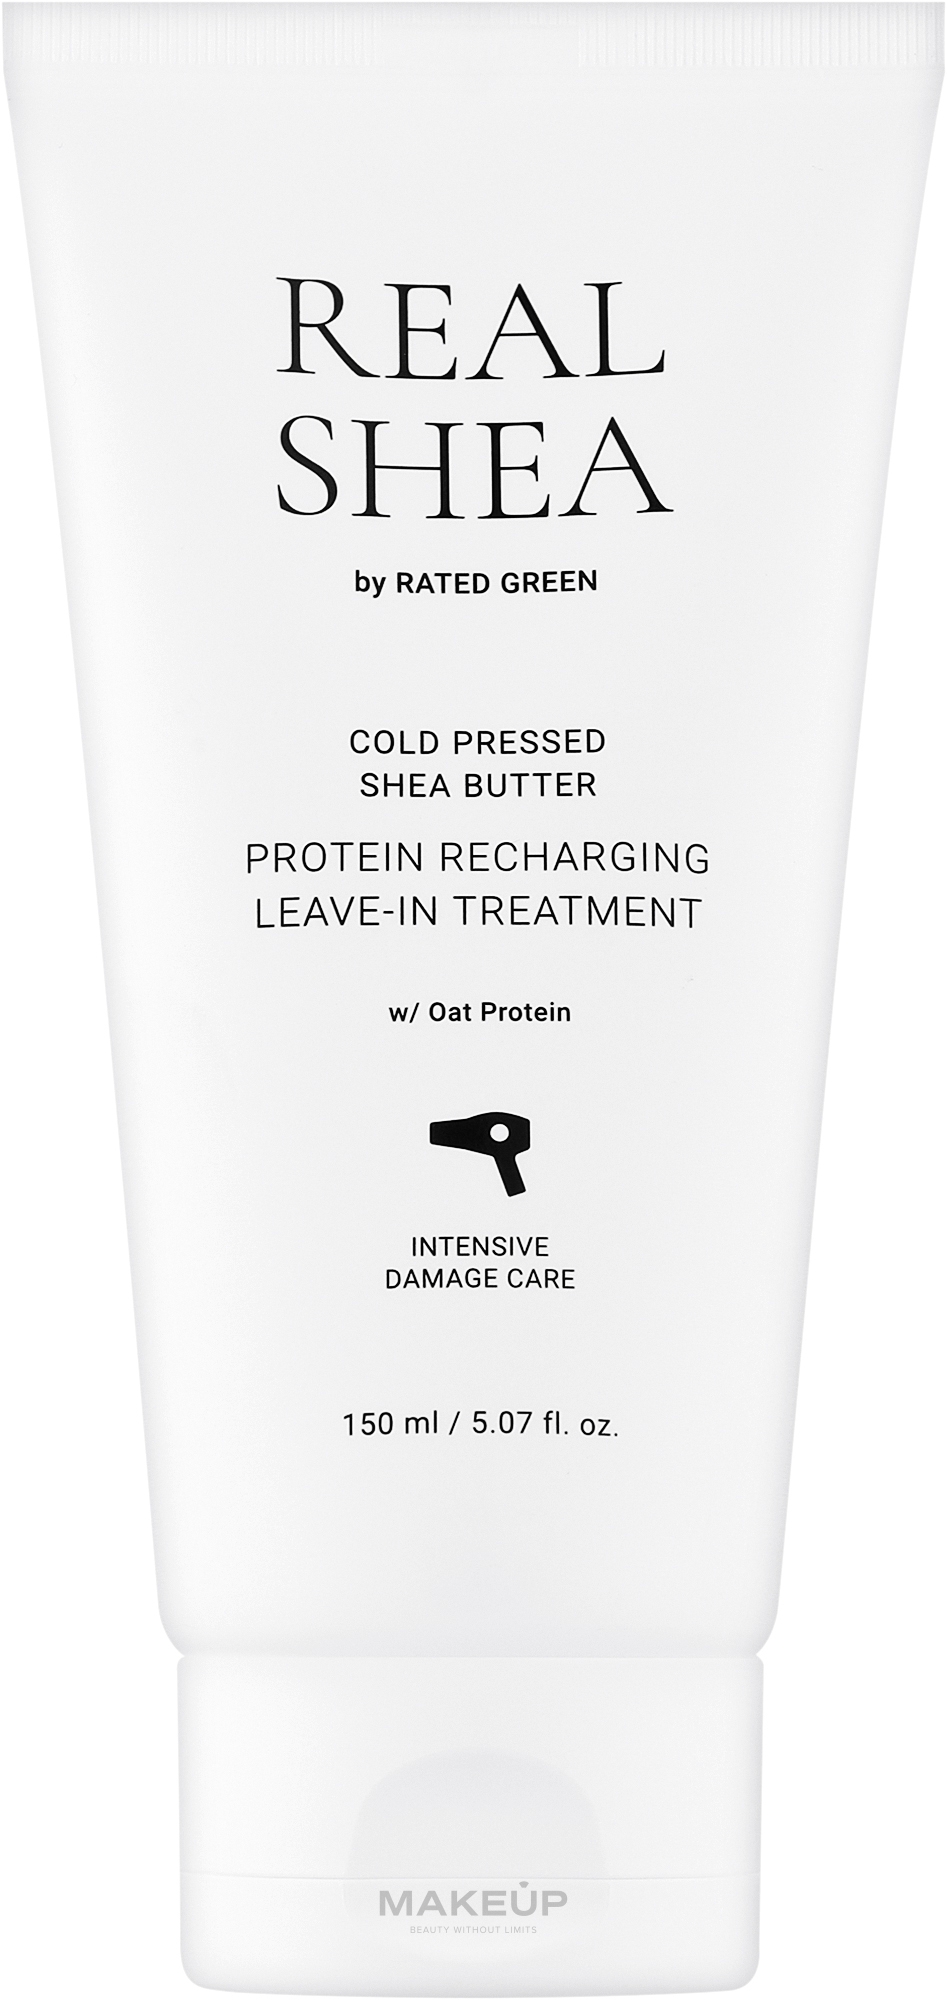 Revitalisierende Haarcreme mit kaltgepresster Sheabutter - Rated Green Real Shea Cold Pressed Shea Butter Protein Recharging Leave-in Treatment — Bild 150 ml